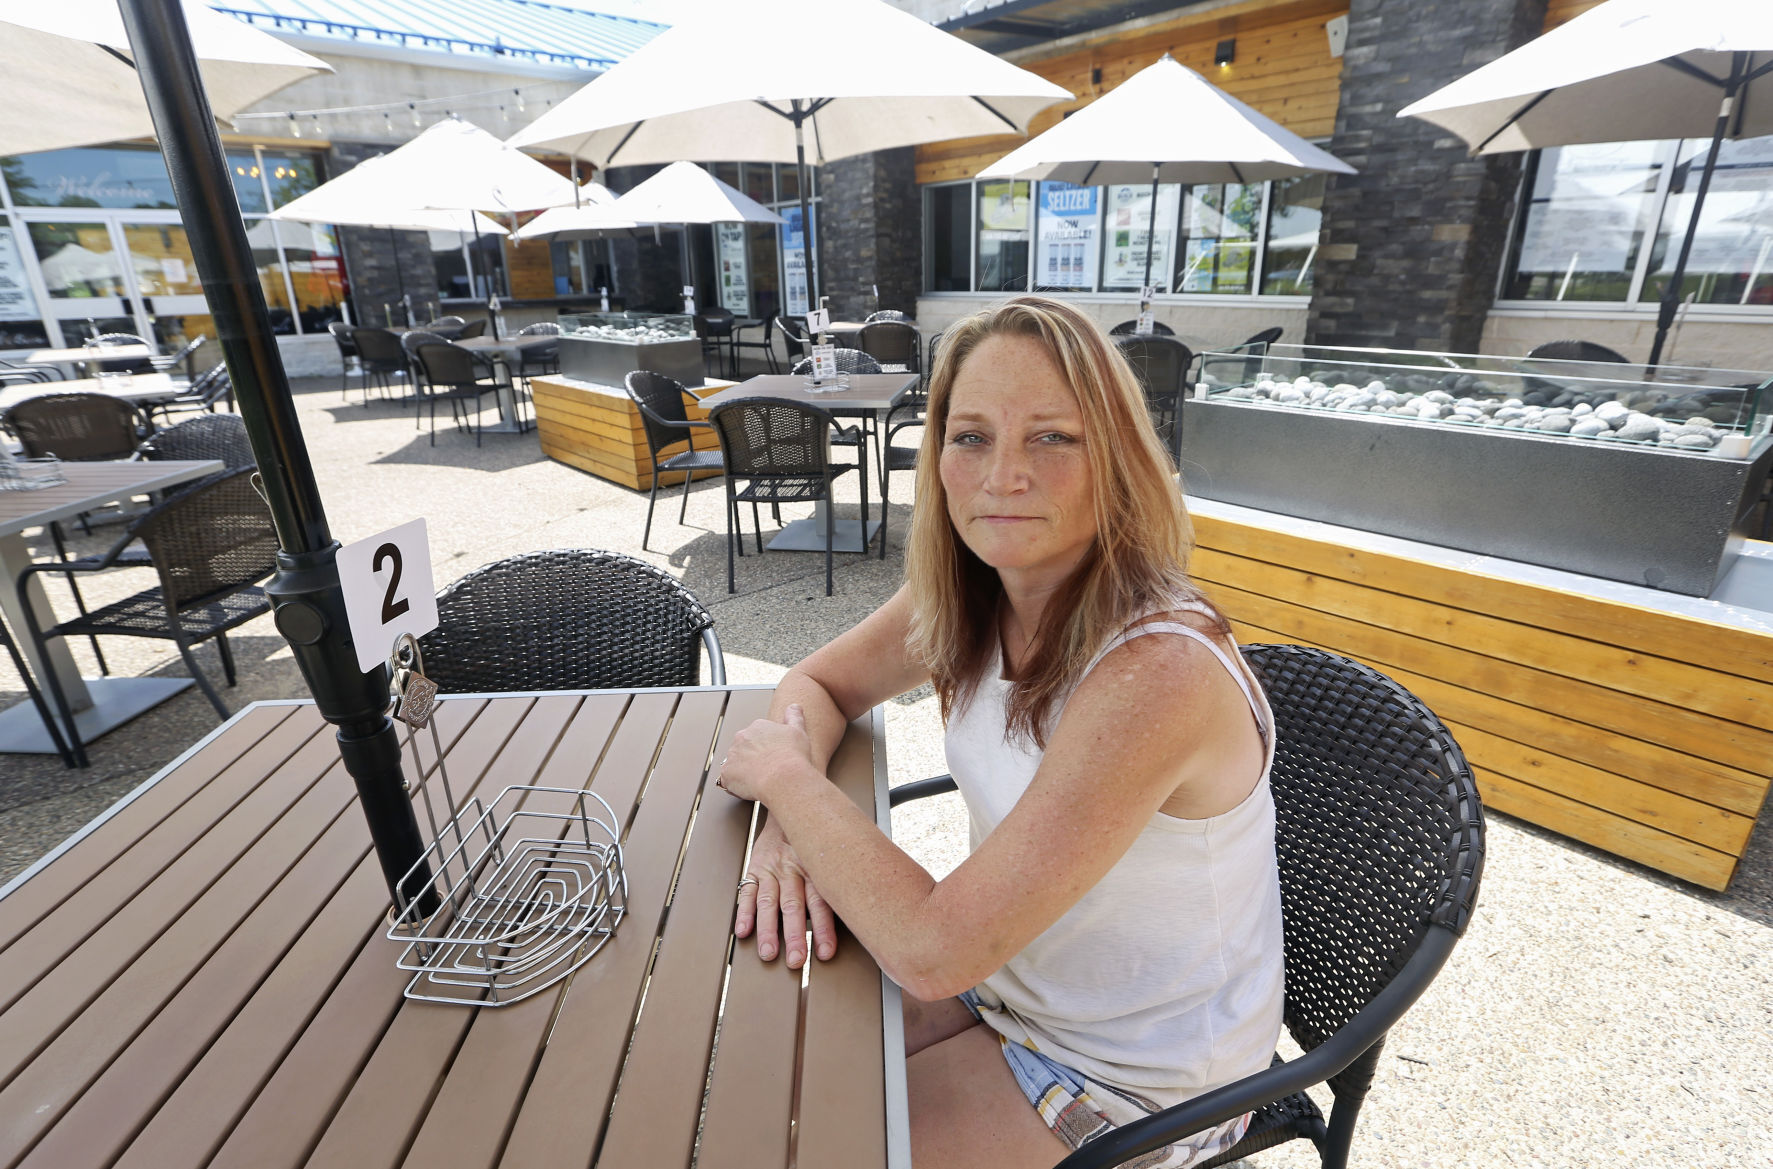 Mary Knupp is owner of Frentress Lake Bar & Grill in East Dubuque, Ill. Photo taken on Thursday, July 16, 2020. PHOTO CREDIT: NICKI KOHL